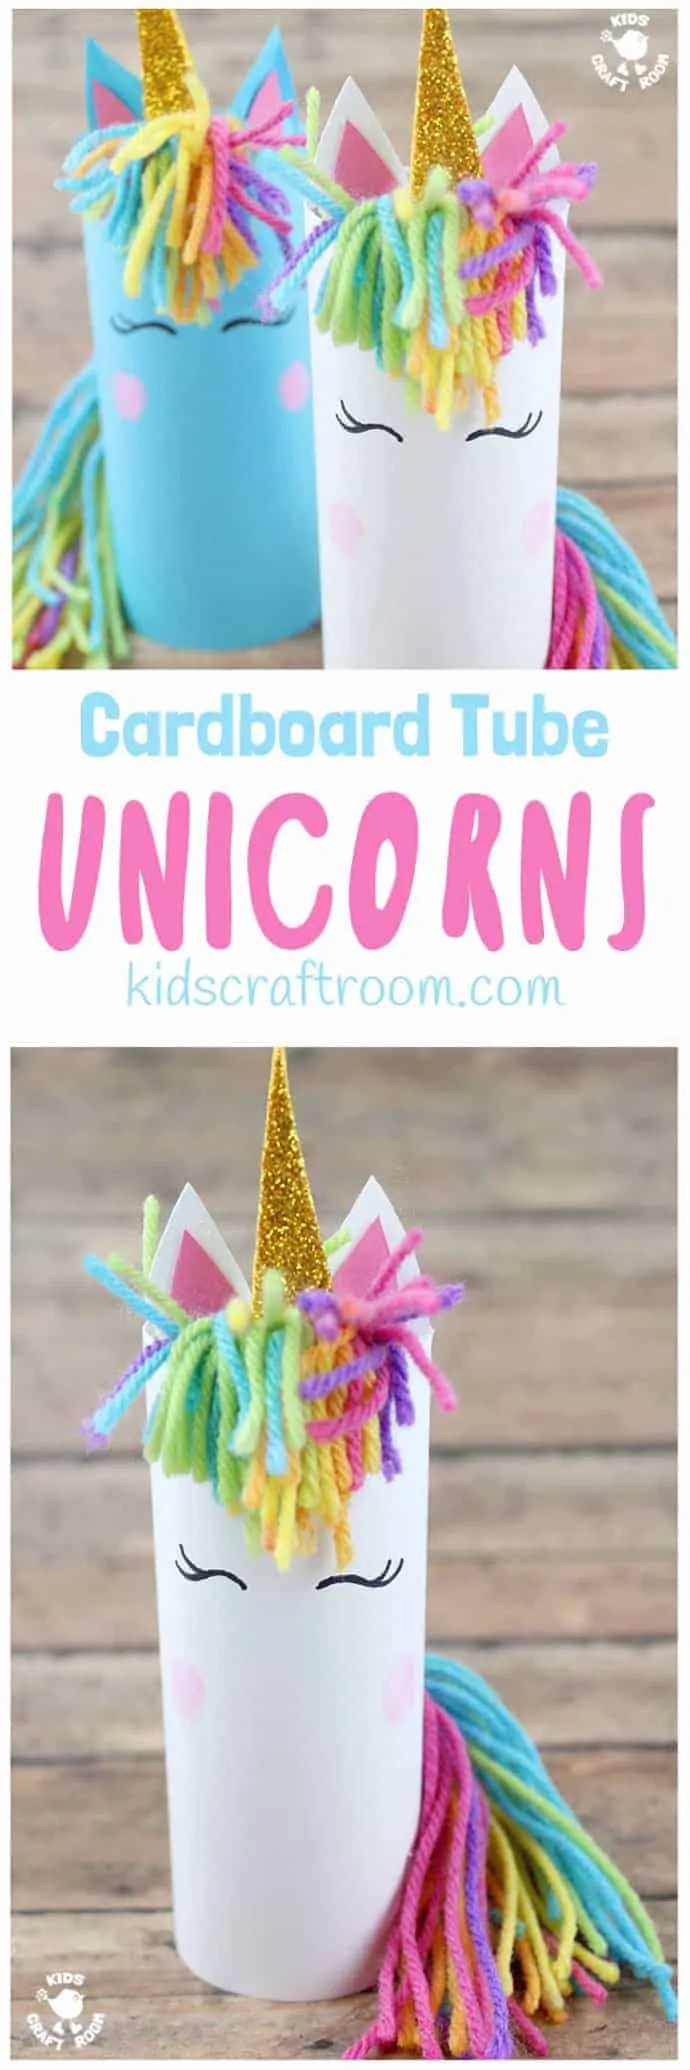 Adorable Unicorn Crafts for Kids - Easy Crafts For Kids